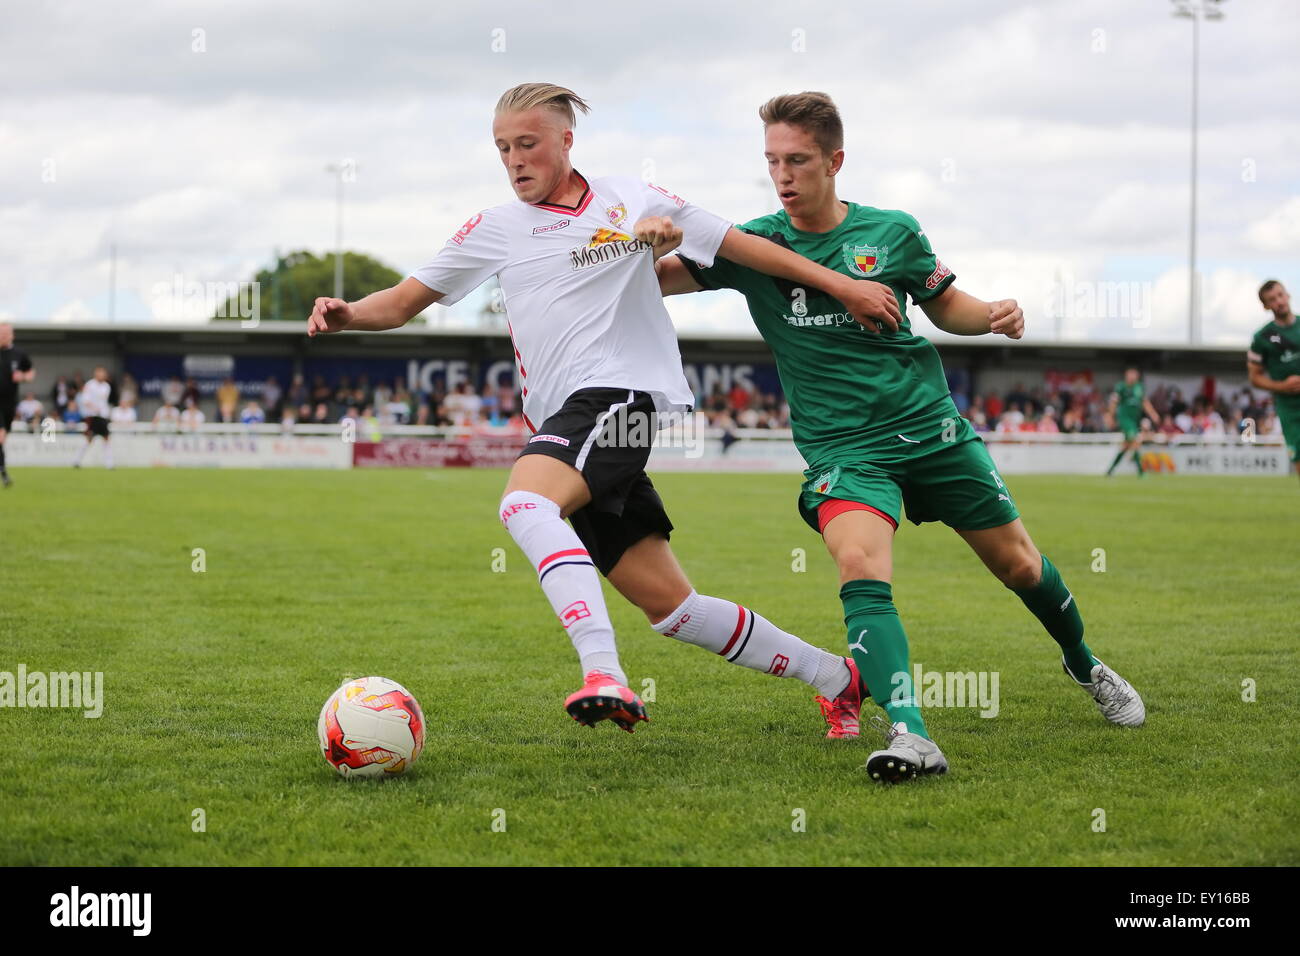 Nantwich, UK. 19th July, 2015. Nantwich Town's  Chris Speed battles for the ball with Crewe Alex's George Cooper during the pre-season friendly match at The Weaver Stadium, Nantwich as Nantwich Town entertained Crewe Alexandra. Credit:  SJN/Alamy Live News Stock Photo